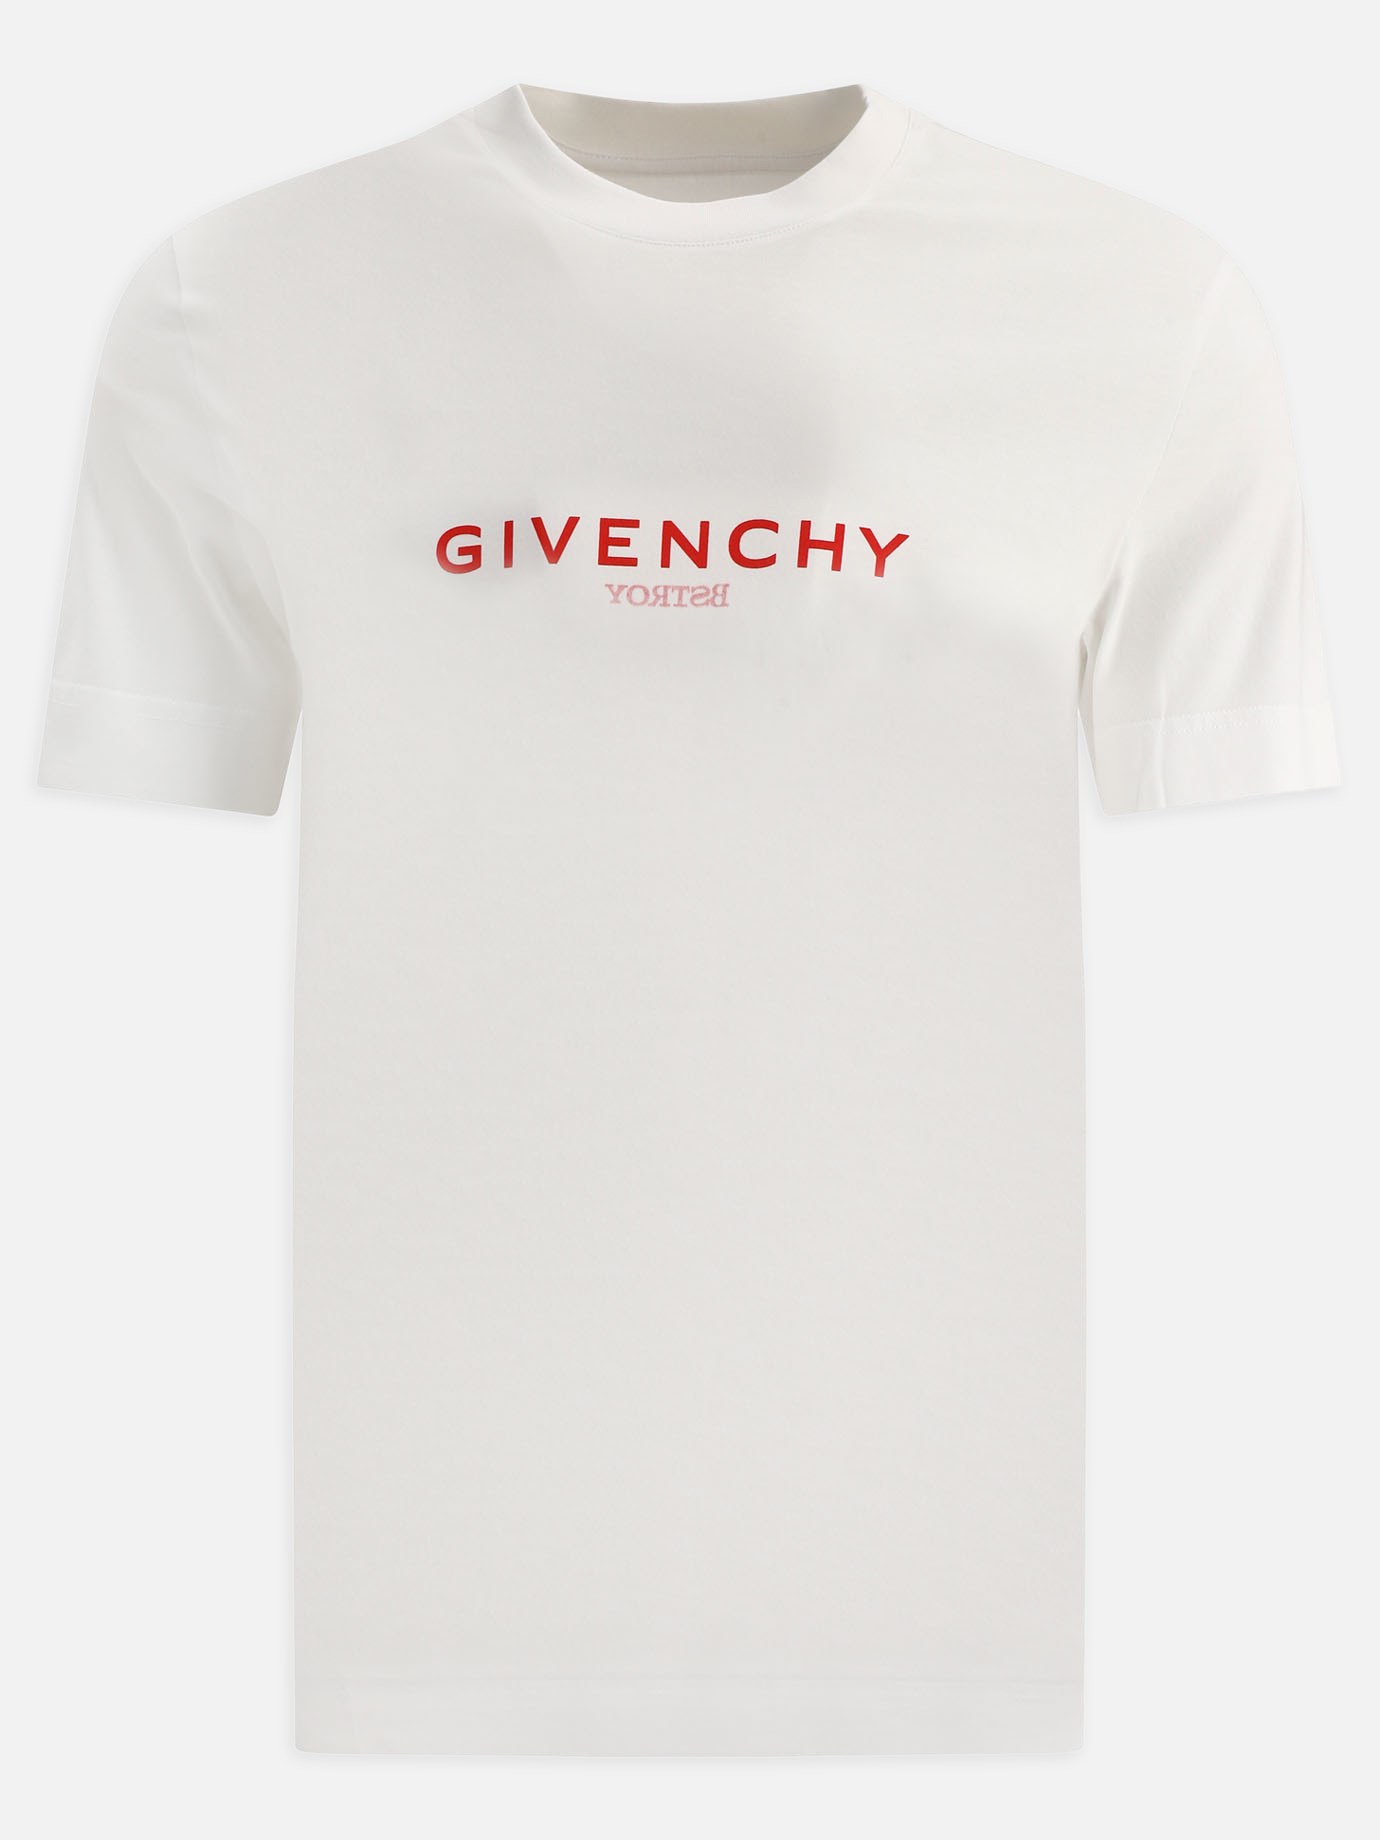 T-shirt reverse  BSTROY x Givenchy  by Givenchy